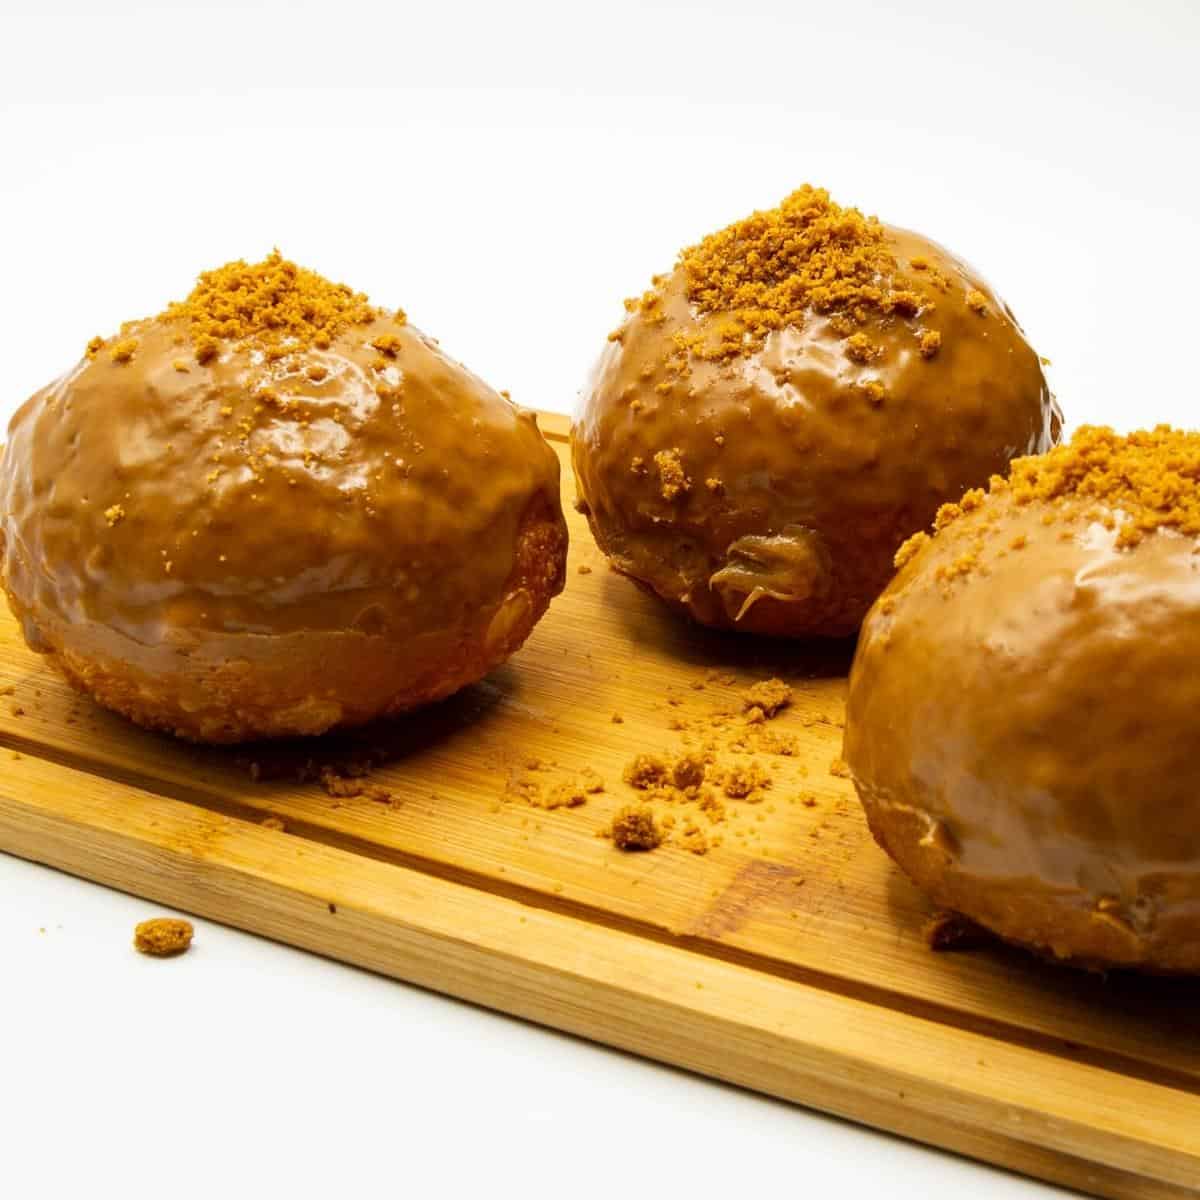 Three donuts on a wooden board.